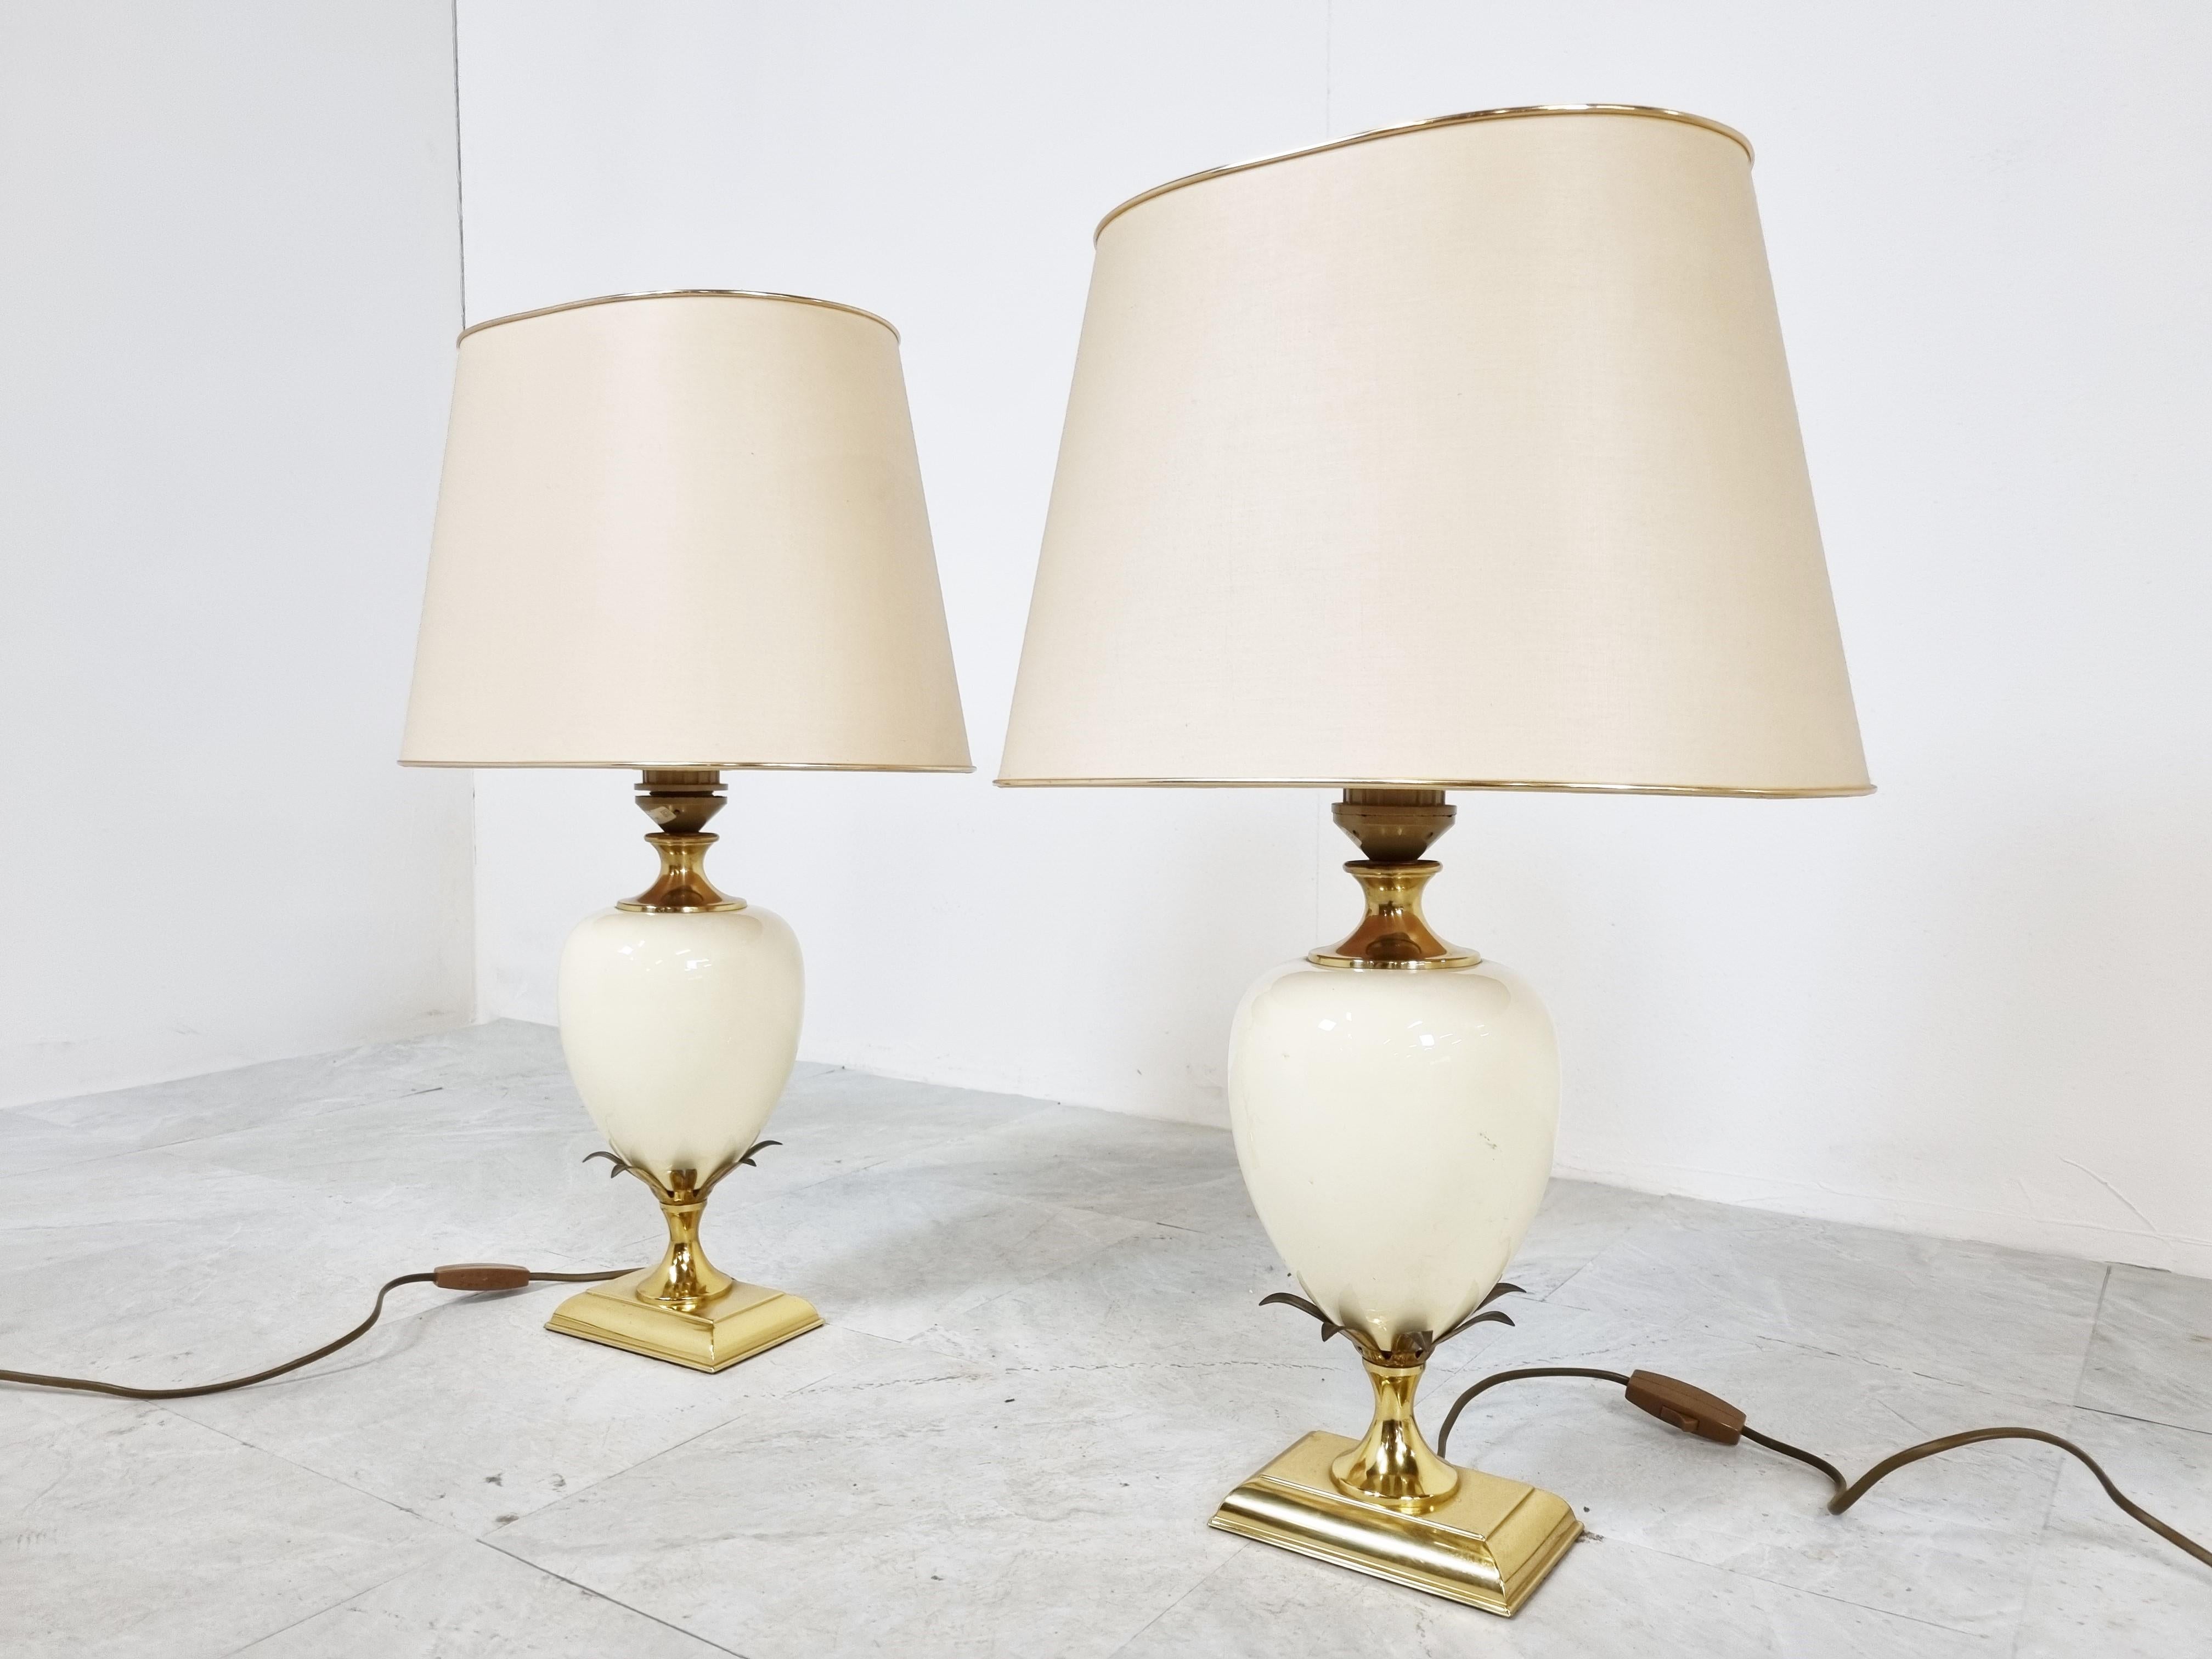 Beautiful pineapple/egg shaped table lamps by Maison Le Dauphin.

These luxurious lamps have an egg shaped center piece finished with brass leafs.

Very good condition with original lamp shades

They work with one standard E27 light bulb and